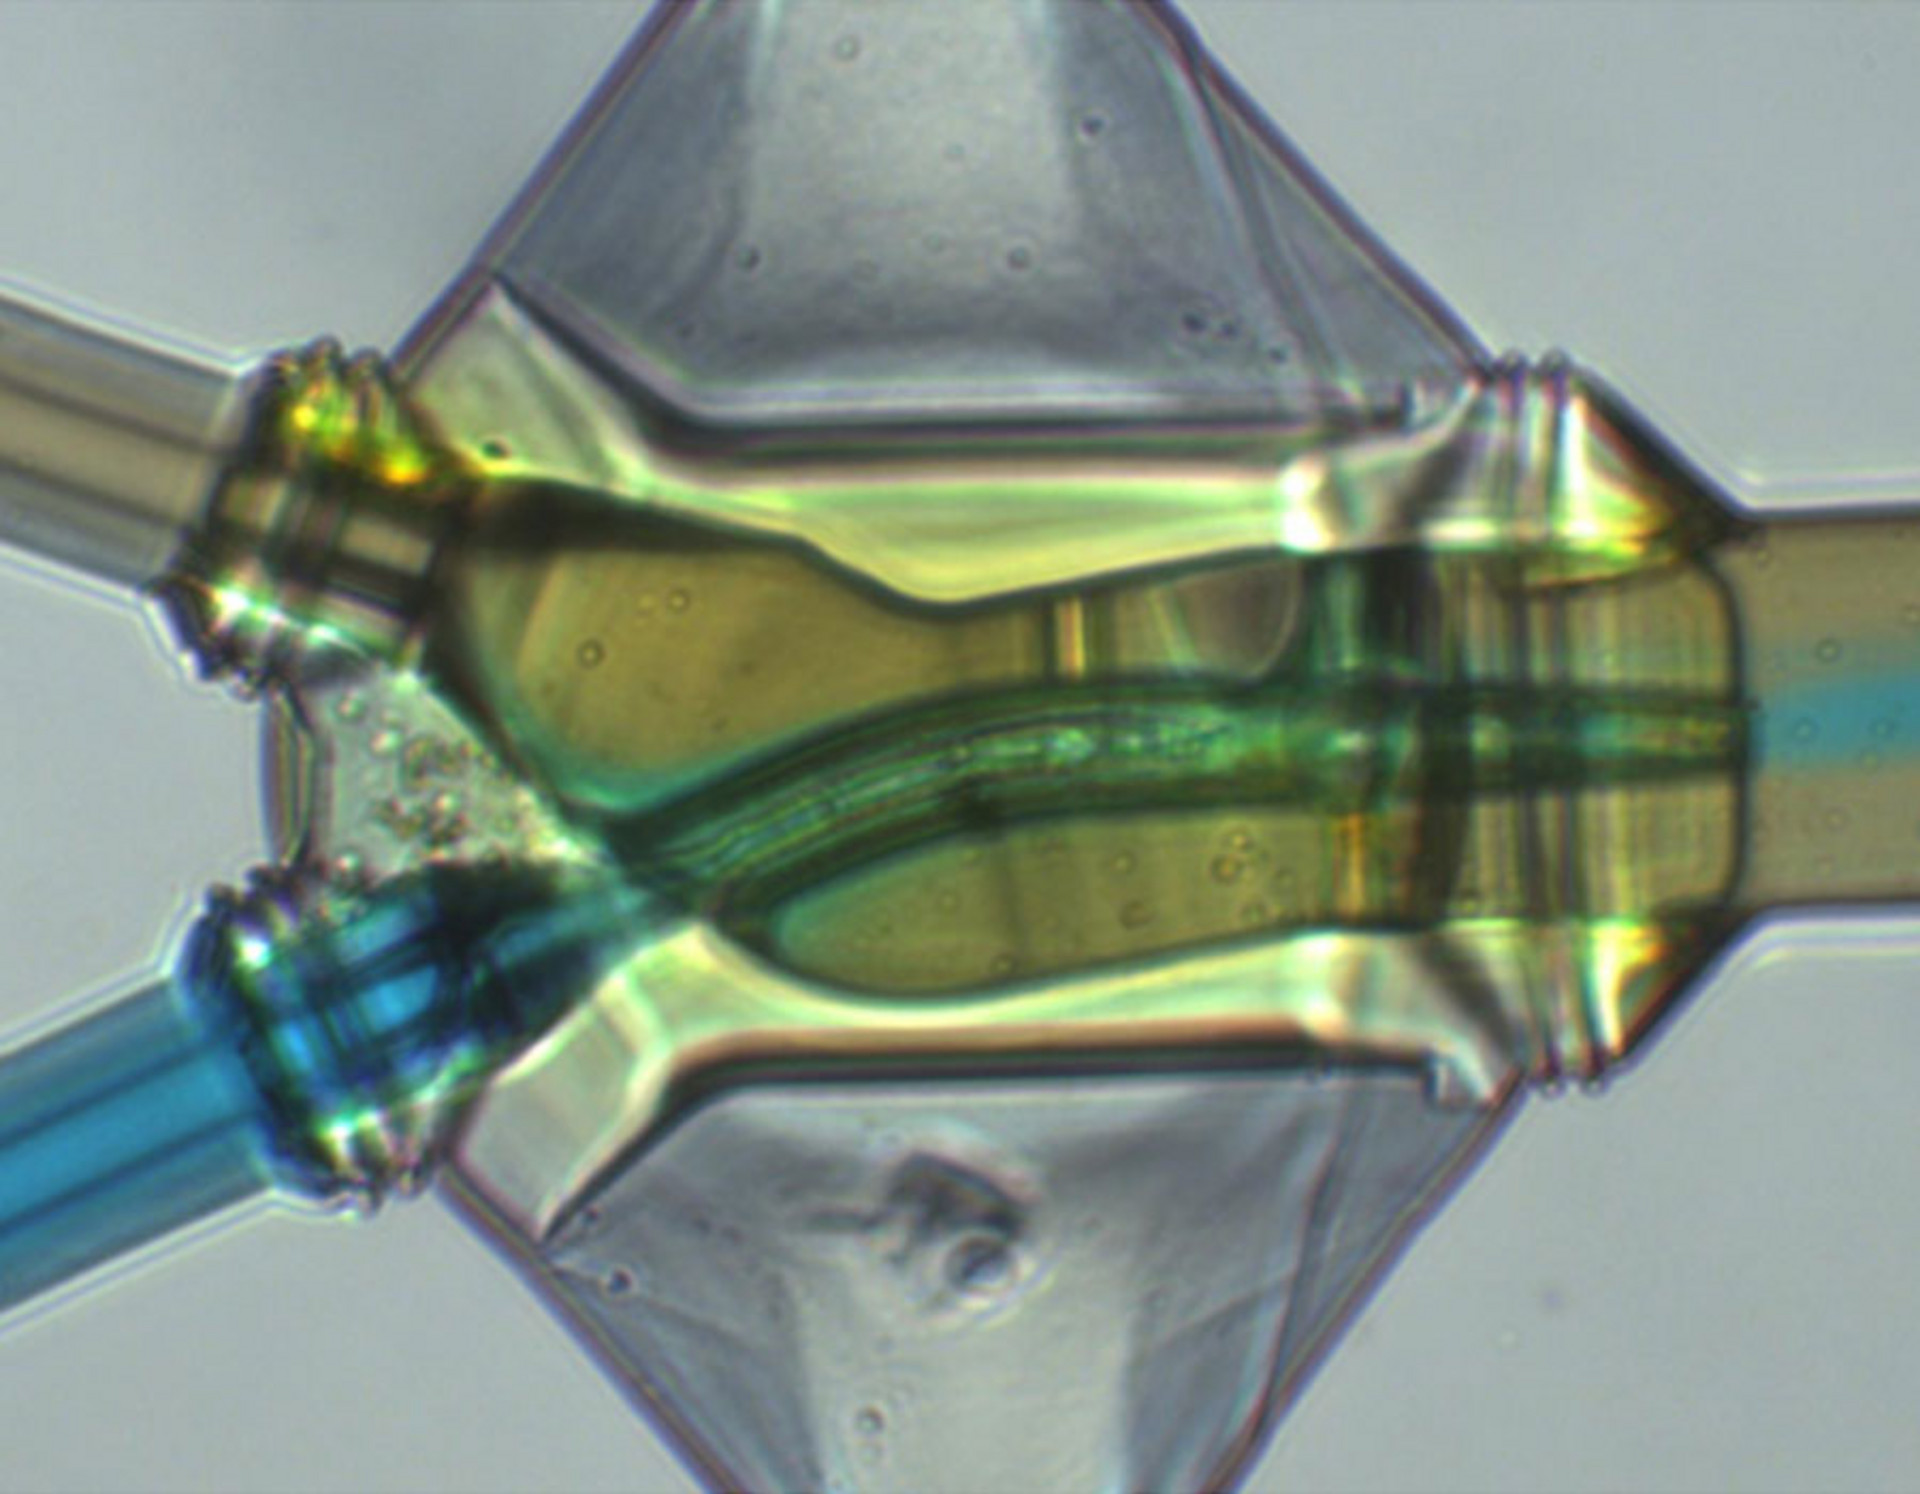 Optical micrograph of the 3D-printed spinneret